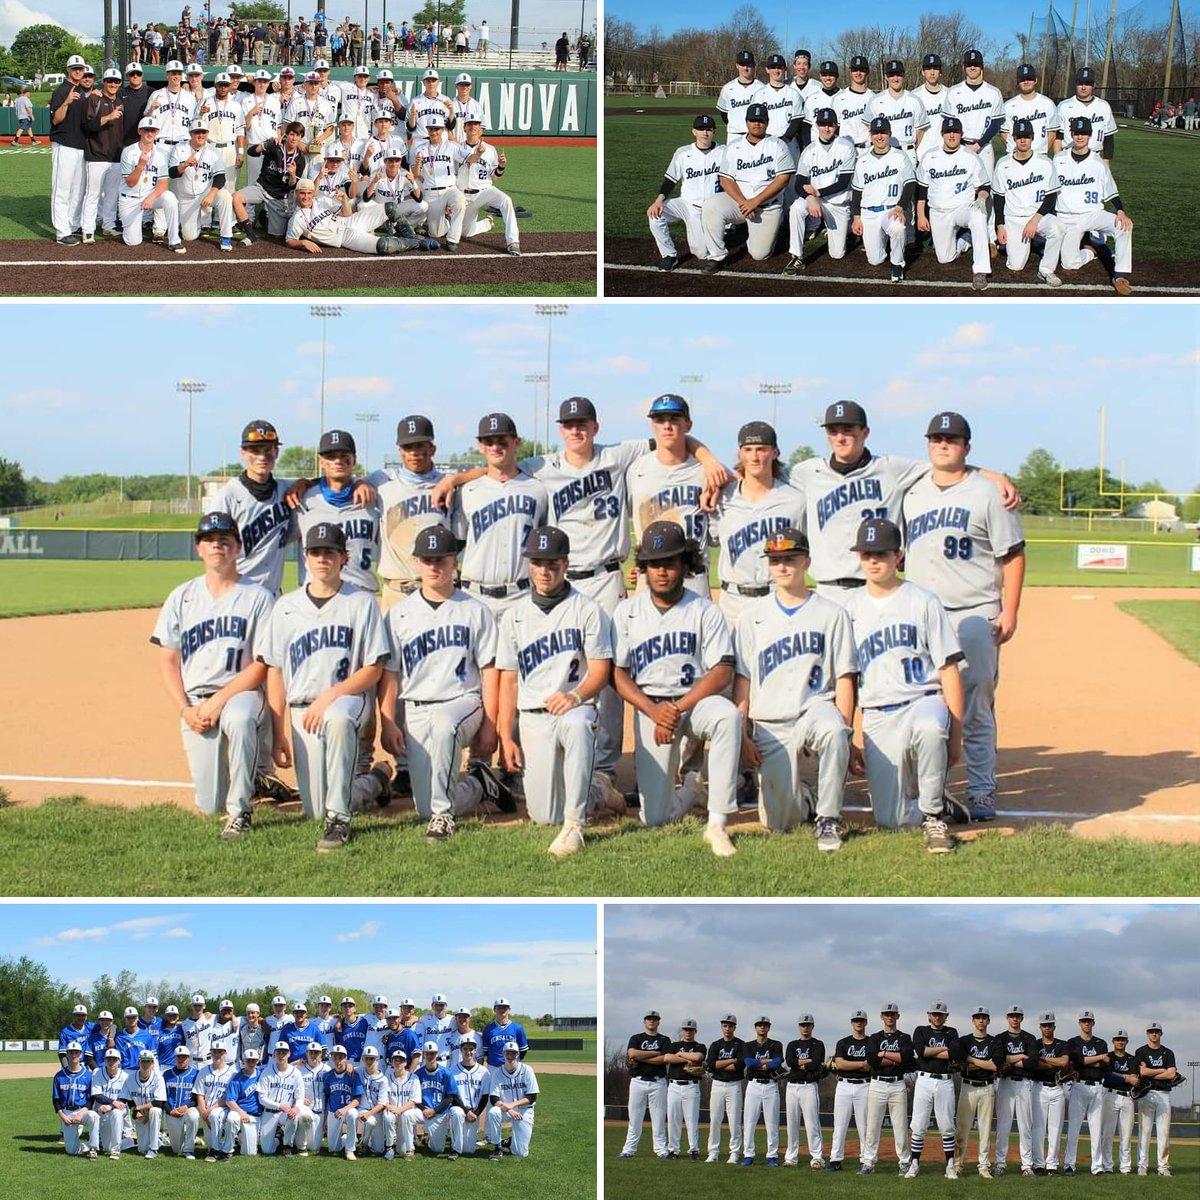 Did you know that over the past 3 seasons played our Bensalem Owls have a record of 59-12? 2018 23 - 4 2019 18 - 5 2021 18 - 3 All of these Bensalem Owls have made us proud!